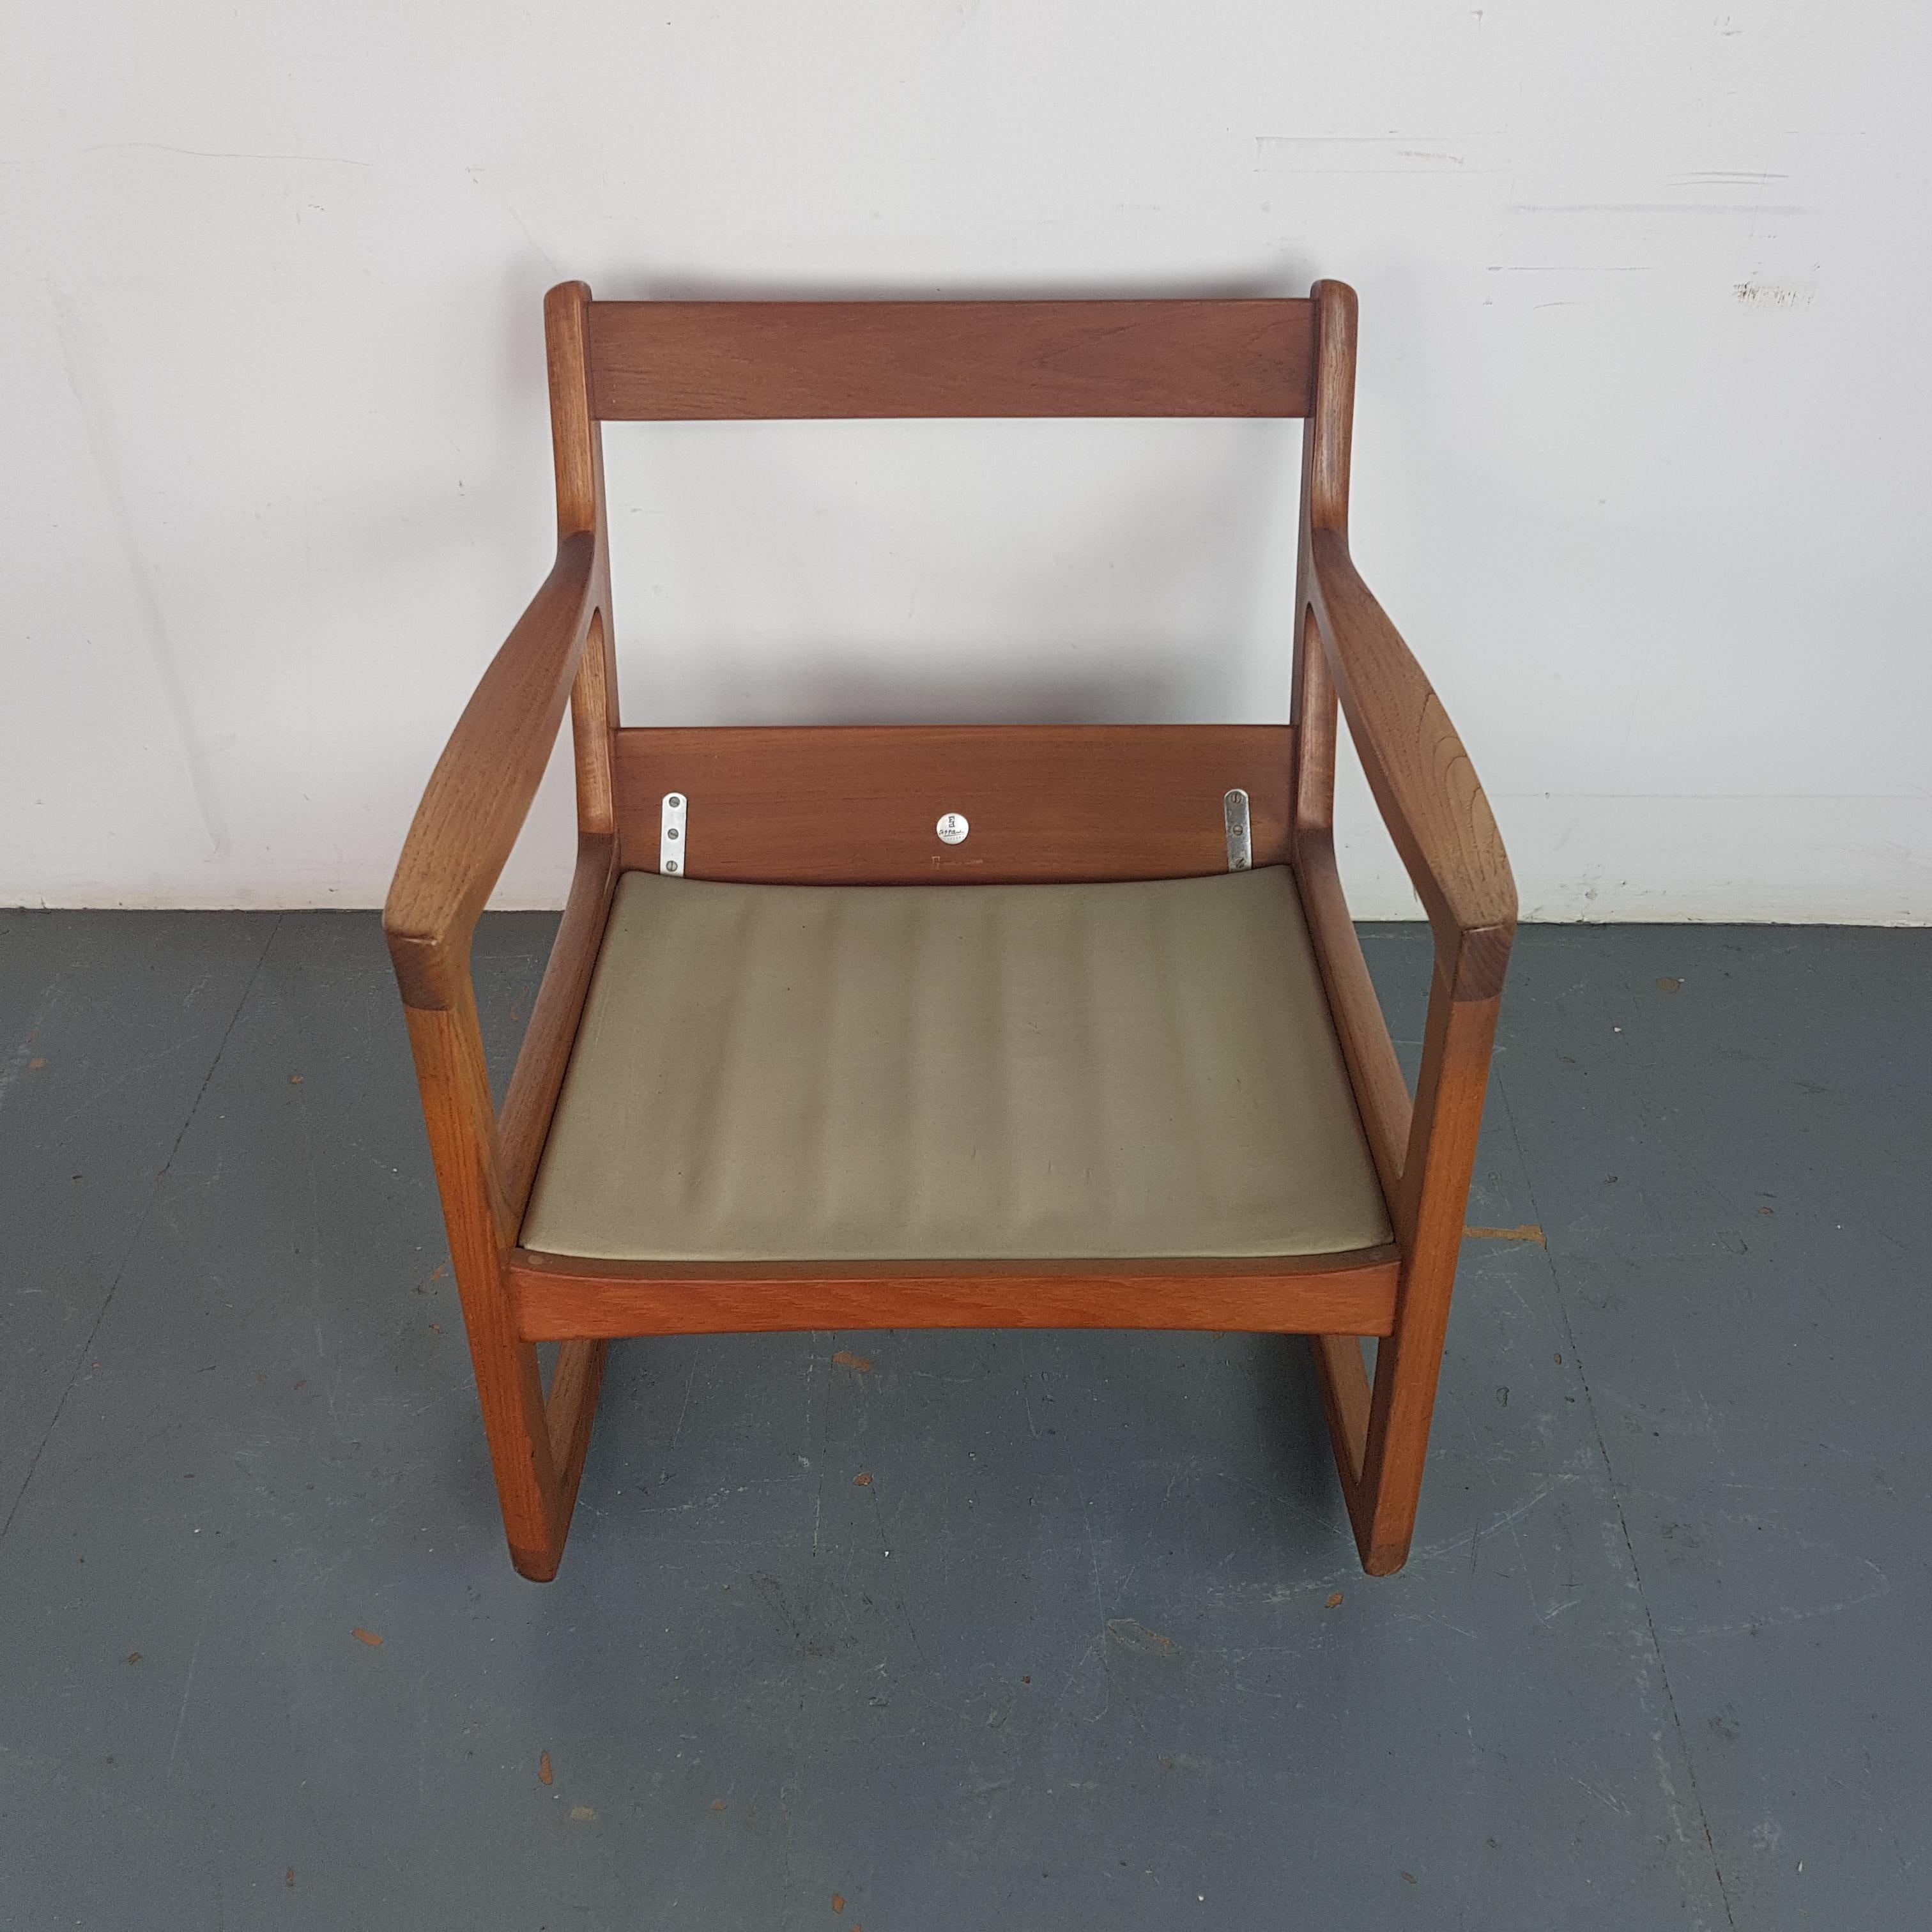 Ole Wanscher, 1960s Teak Rocking Chair Made by France and Son, Denmark 2